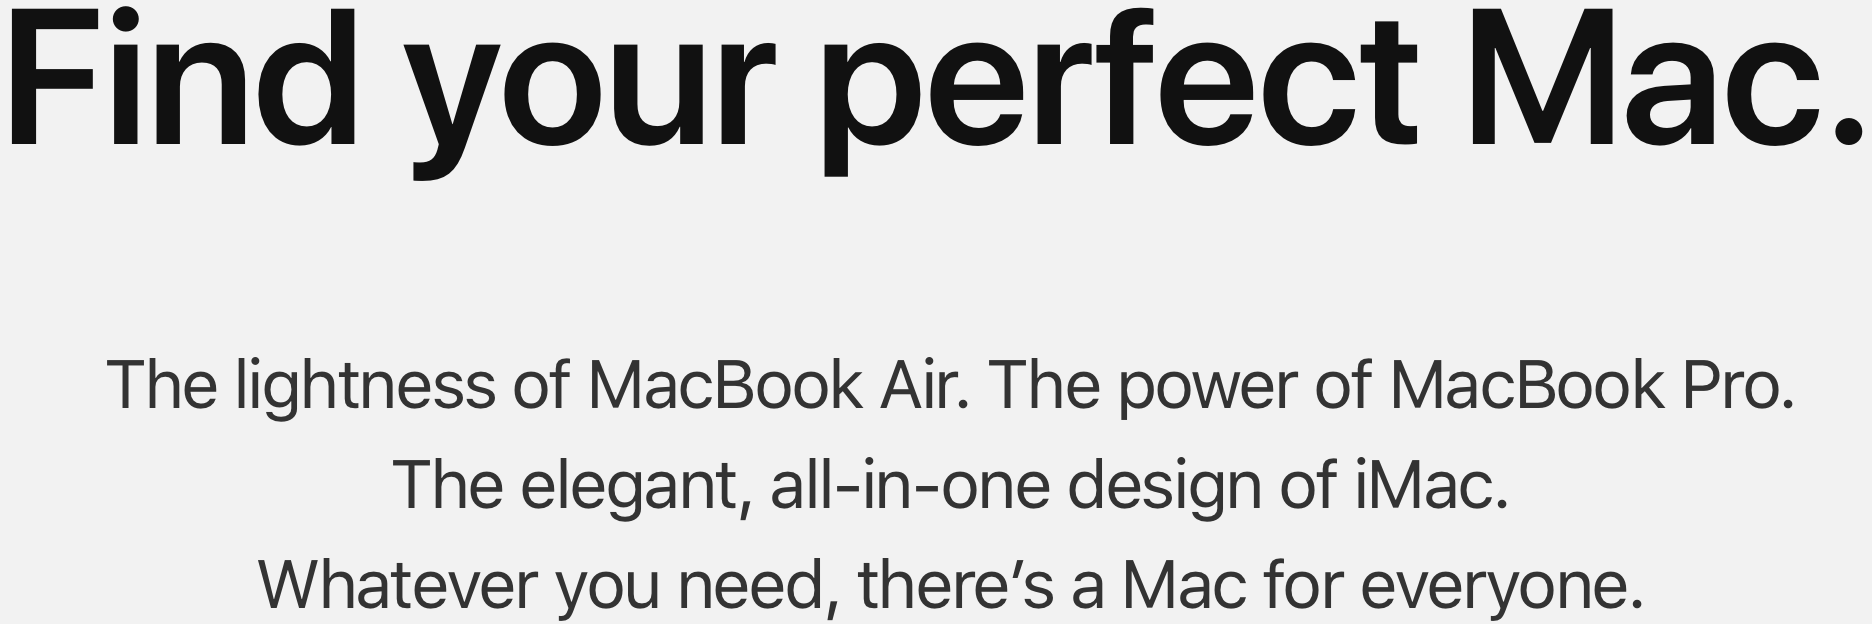 Find your perfect Mac. The lightness of MacBook Air. The power of Macbook Pro. The elegant, all-in-one design of iMac. Whatever you need, there's a Mac for everyone.